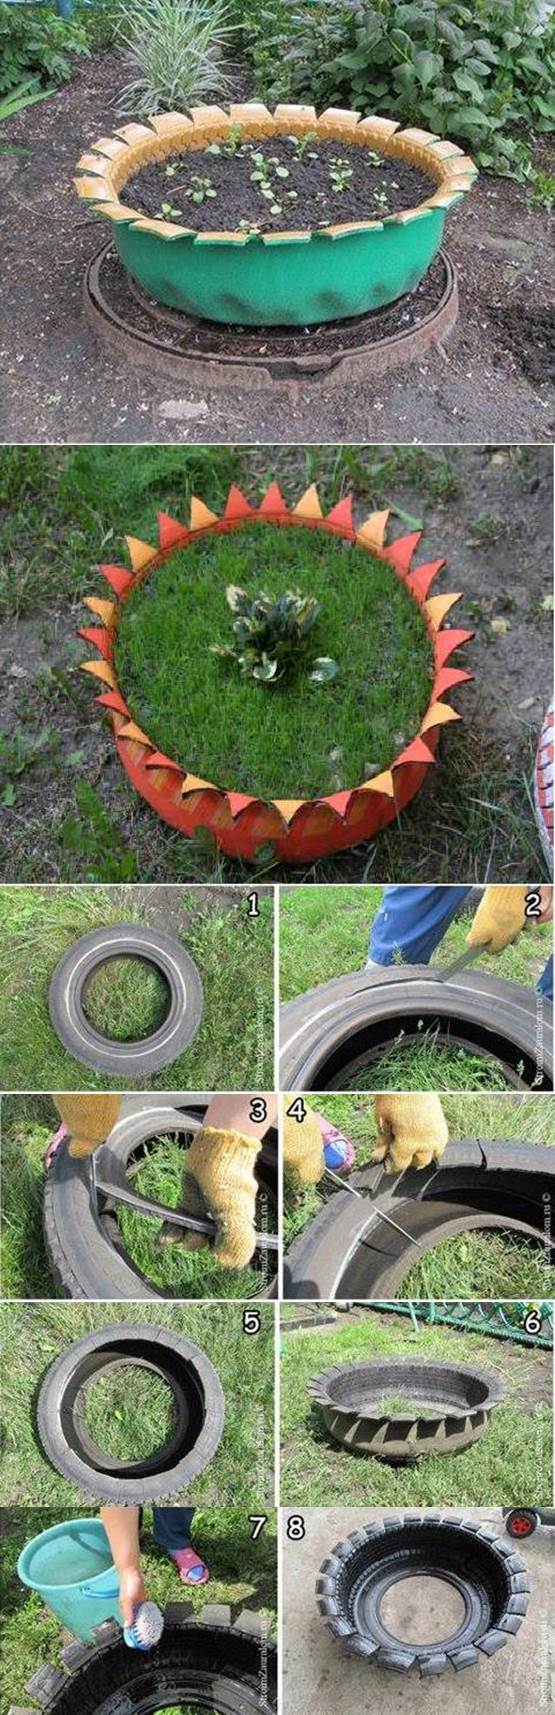 Old-Tire-Turned-into-Plant-Pot-2